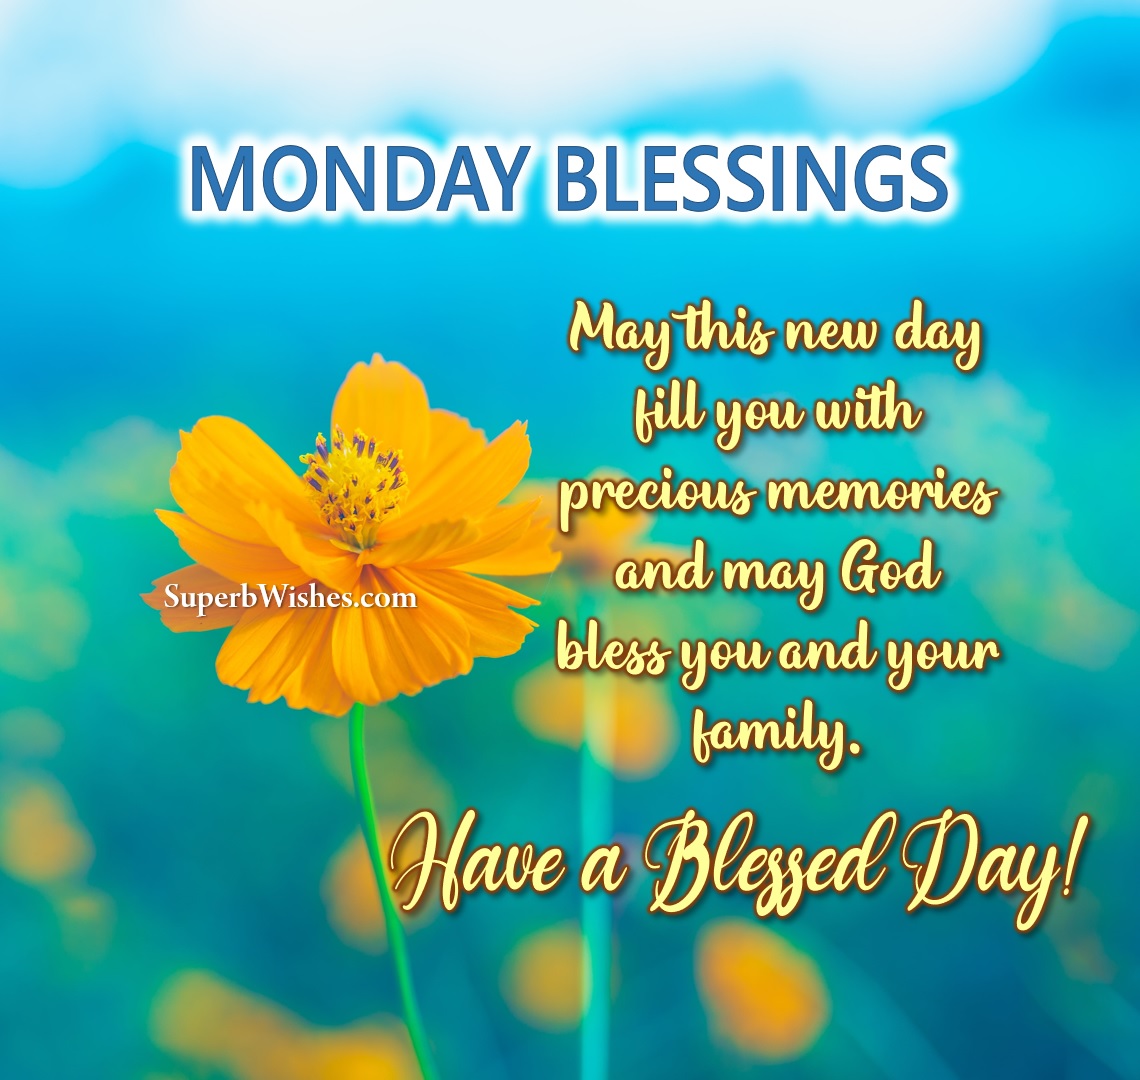 Monday Blessings 2023 Images - May God Bless You | SuperbWishes.com